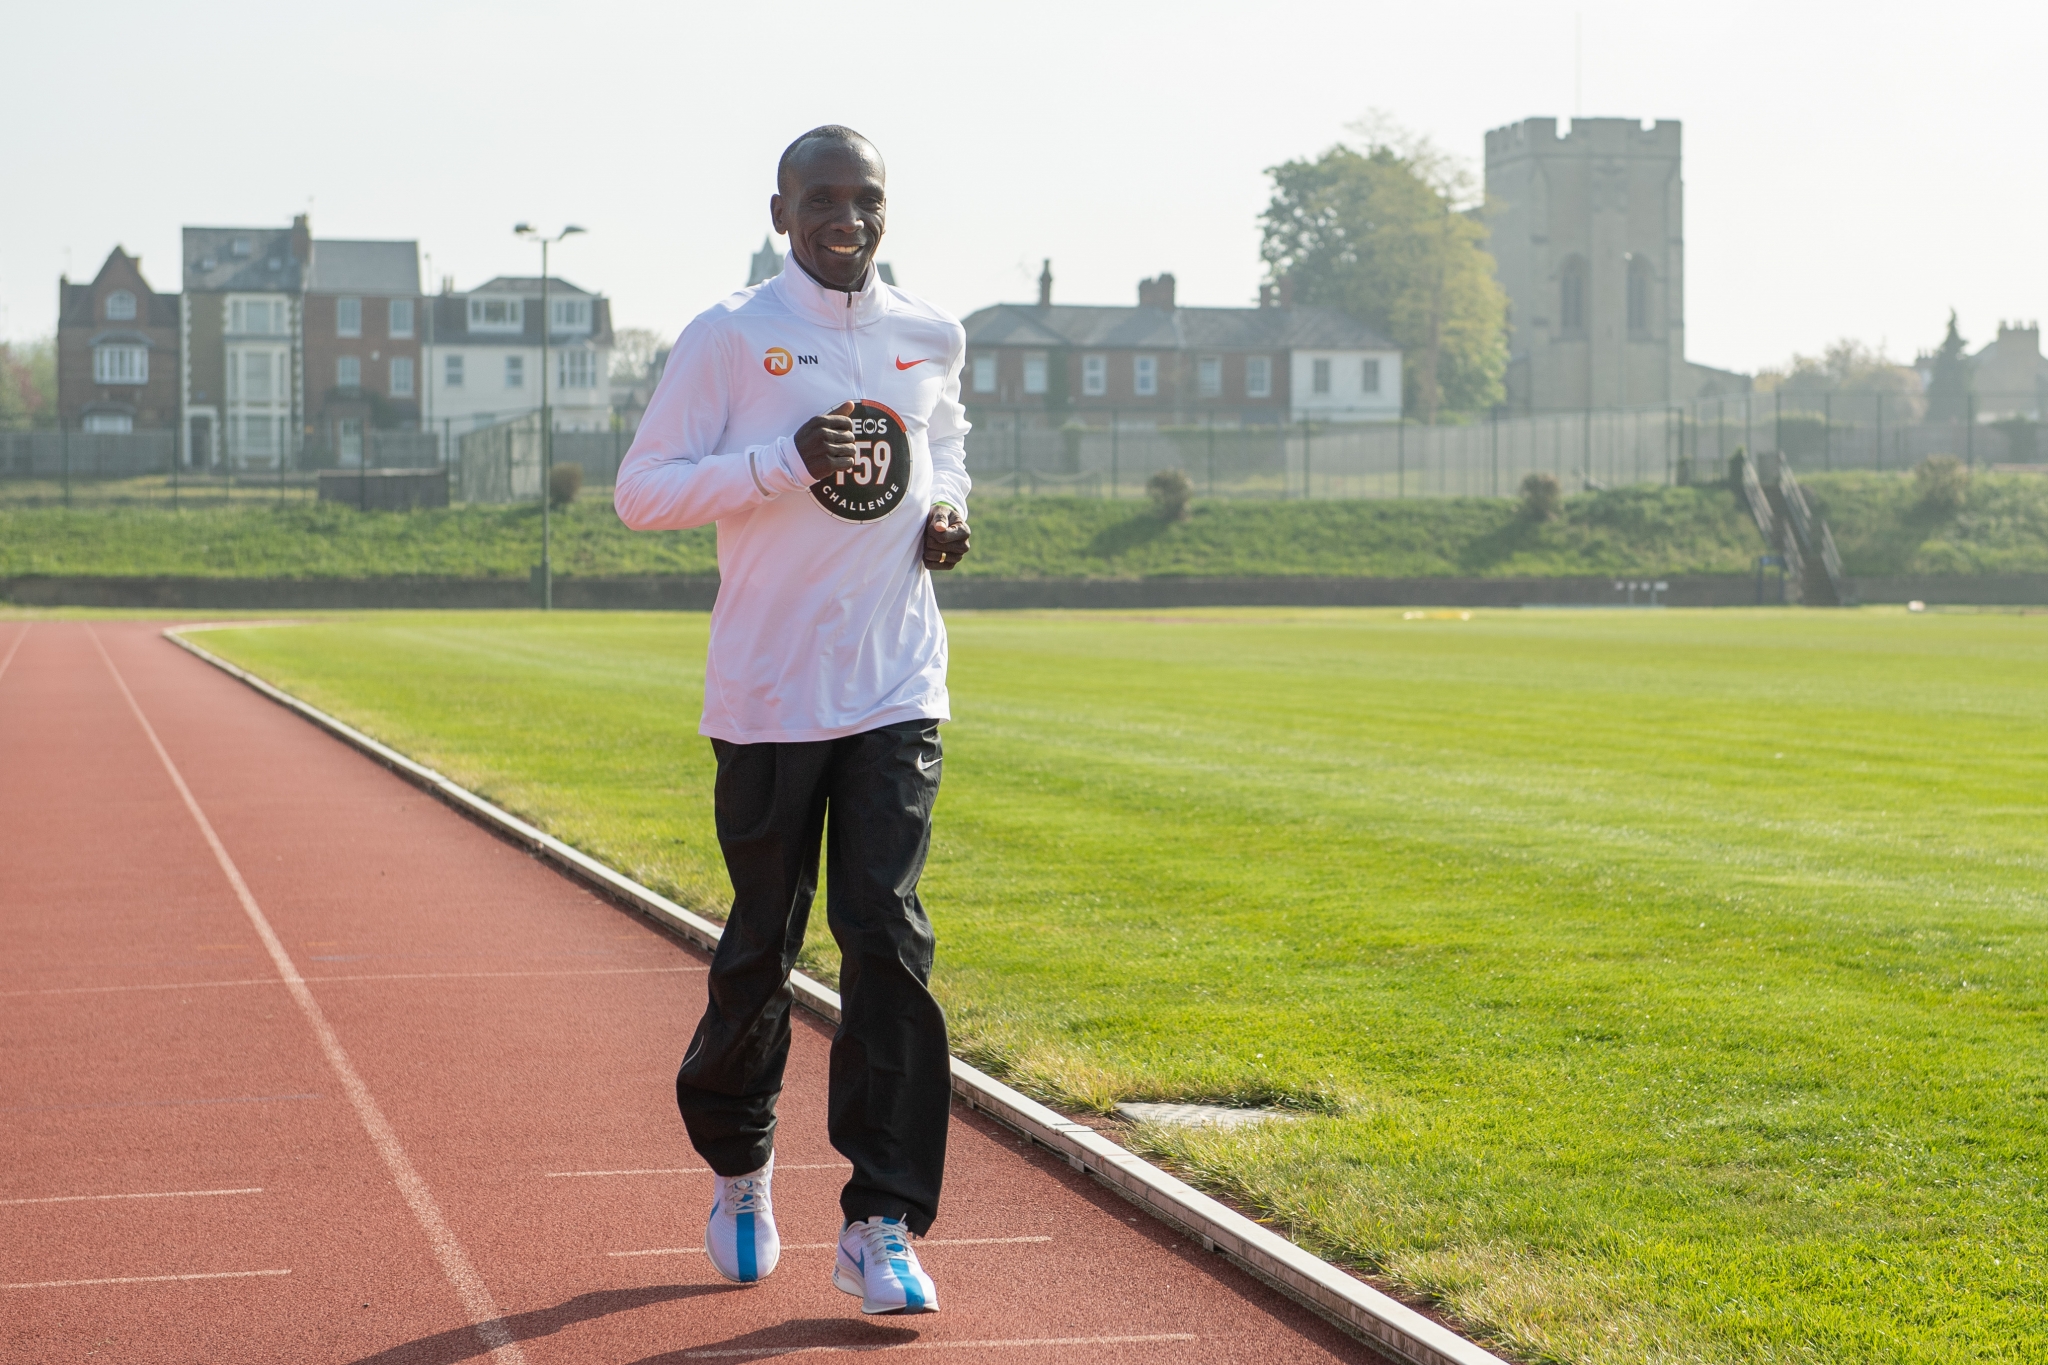 Eliud Kipchoge KEN, at the Iffley road running track on the 30th April 2019. Photo: Thomas Lovelock for london marathon events